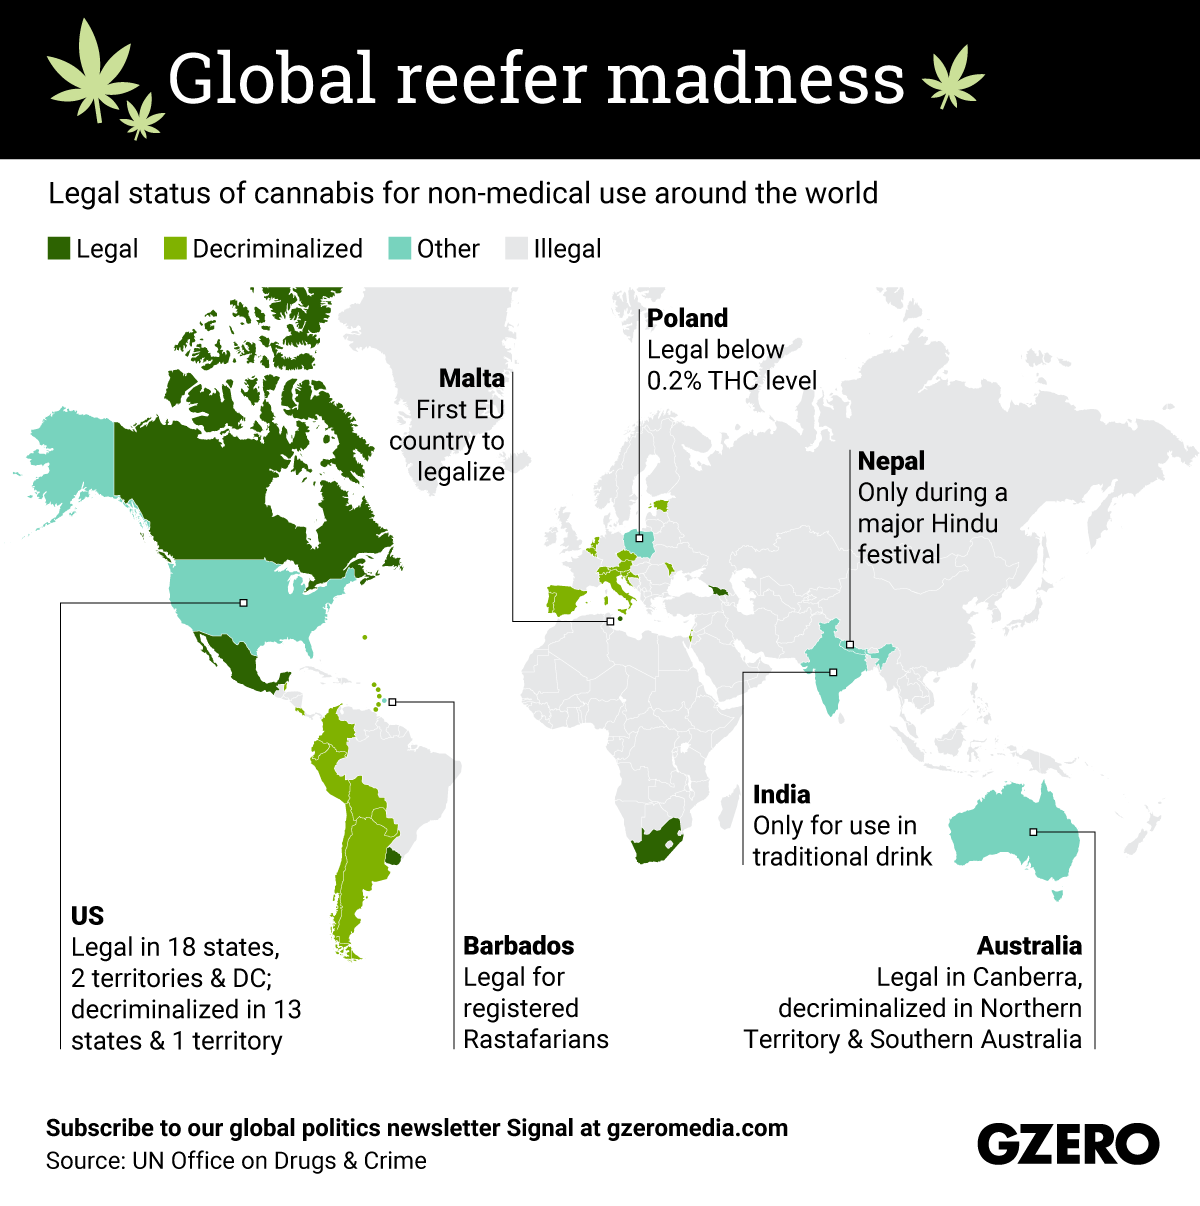 The Graphic Truth: Global reefer madness